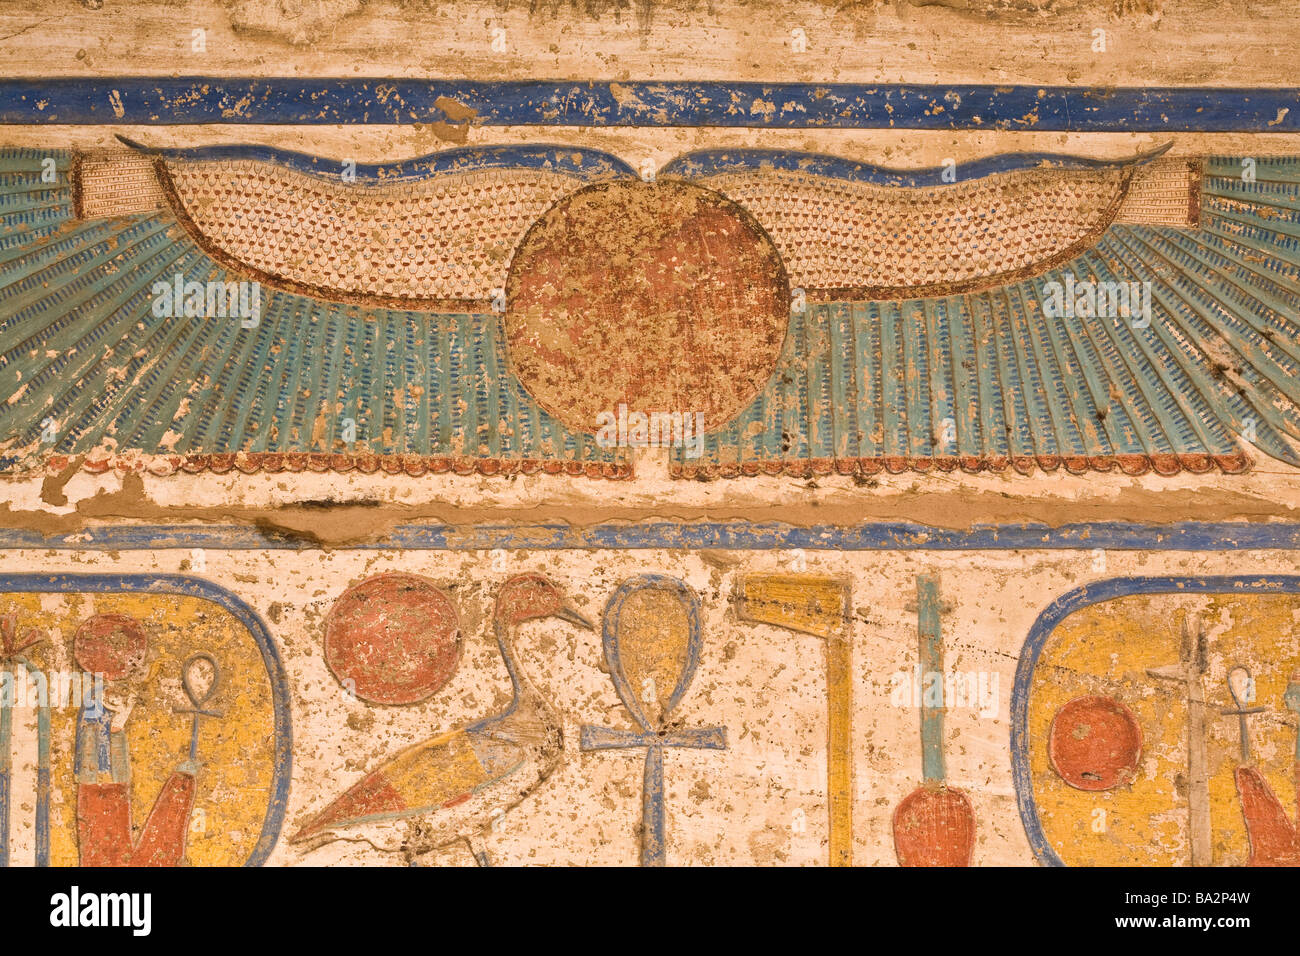 Painted reliefs on ceiling of second court at Medinet Habu , Mortuary Temple of Ramesses III, West bank of Nile, Luxor, Egypt Stock Photo